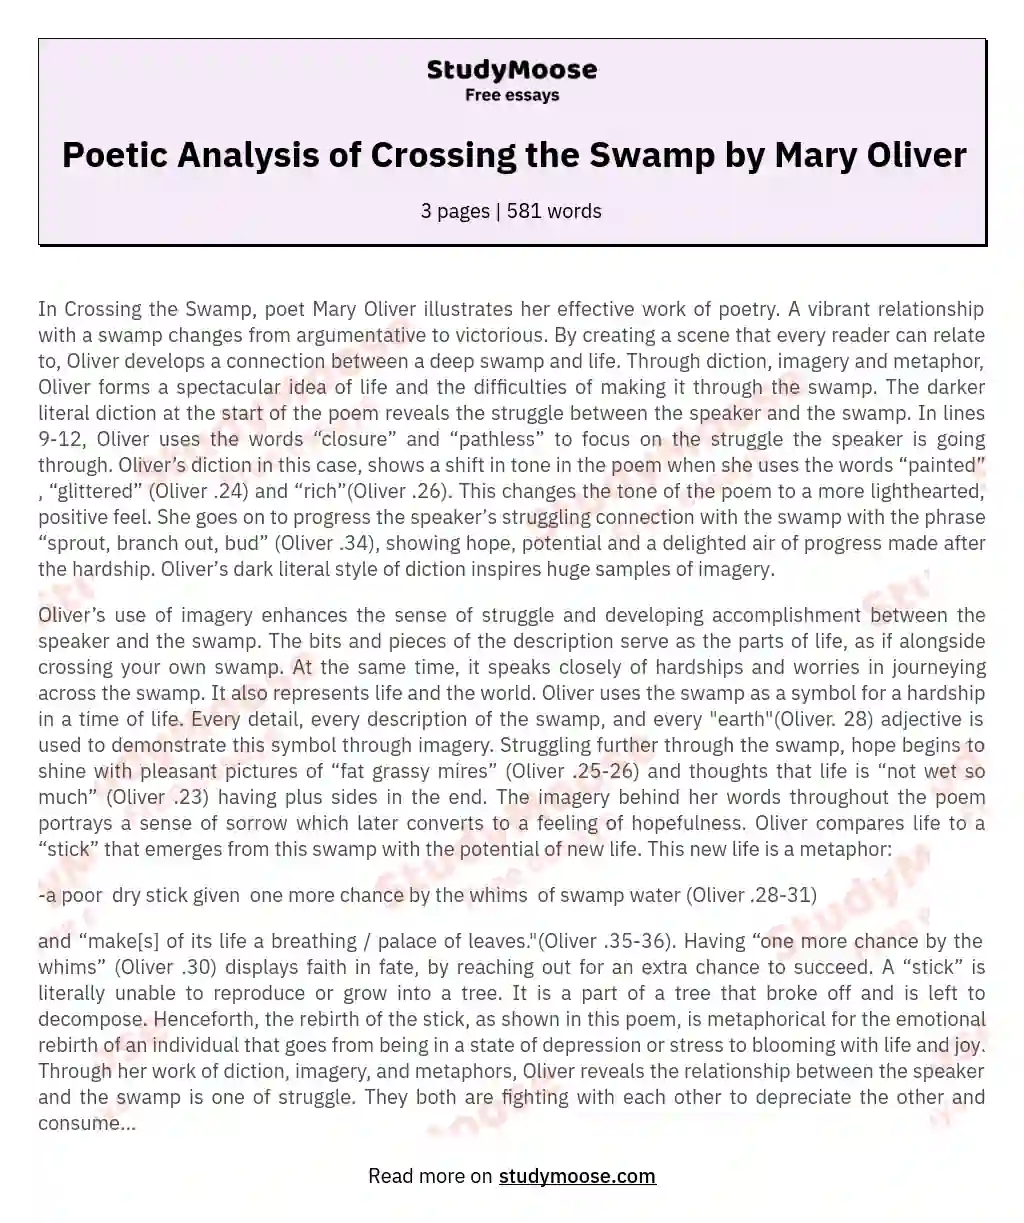 Poetic Analysis of Crossing the Swamp by Mary Oliver essay